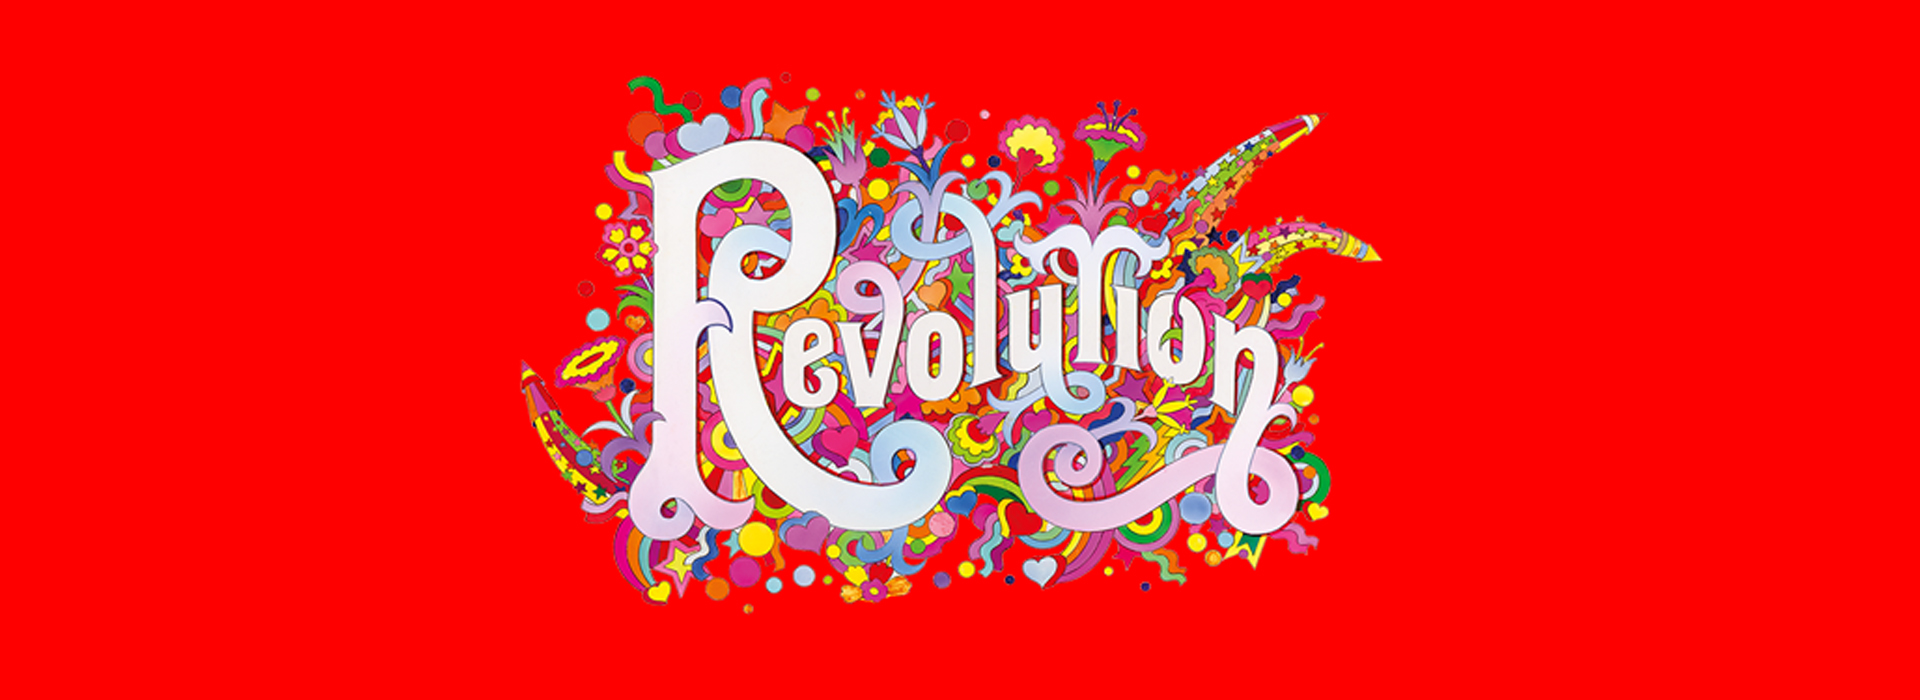 Revolution. Records and Rebels 1966-1970